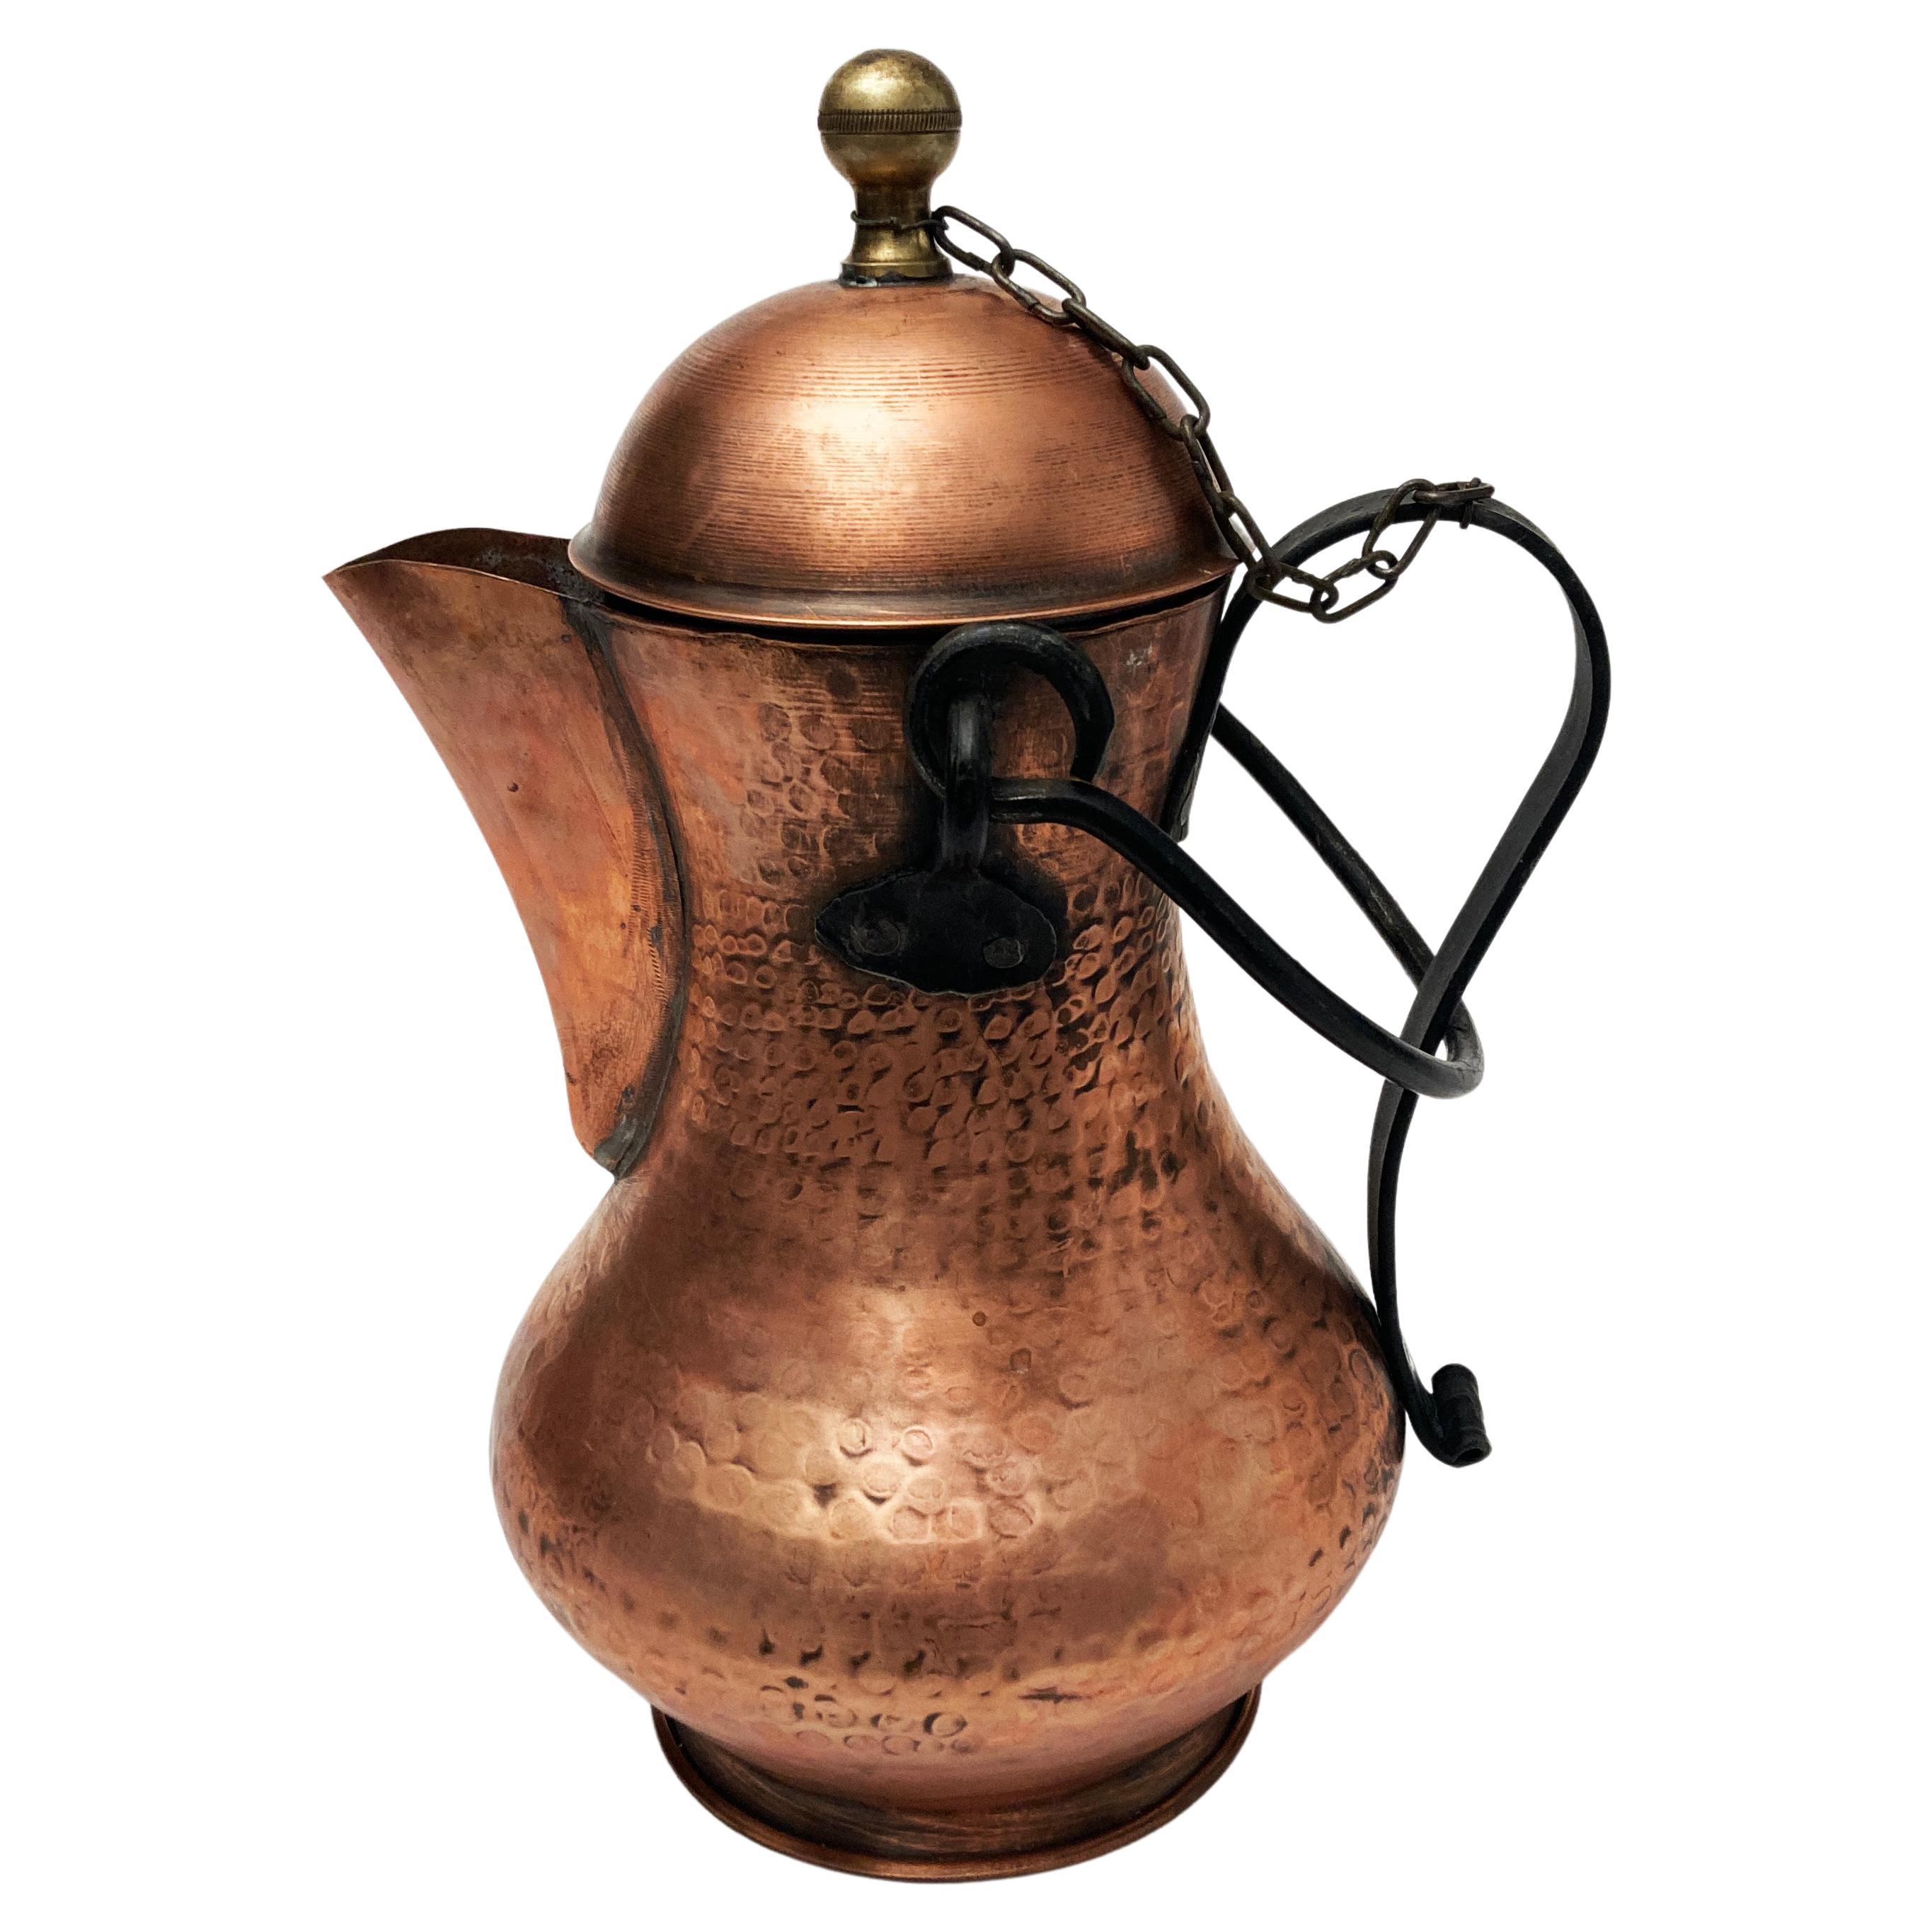 This beautifully crafted water vessel is most likely of Spanish creation during the early part of the 20th century. This hand-hammered pot has two wrought iron handles; one pouring handle and the other is a carrying handle. The lid is attached with